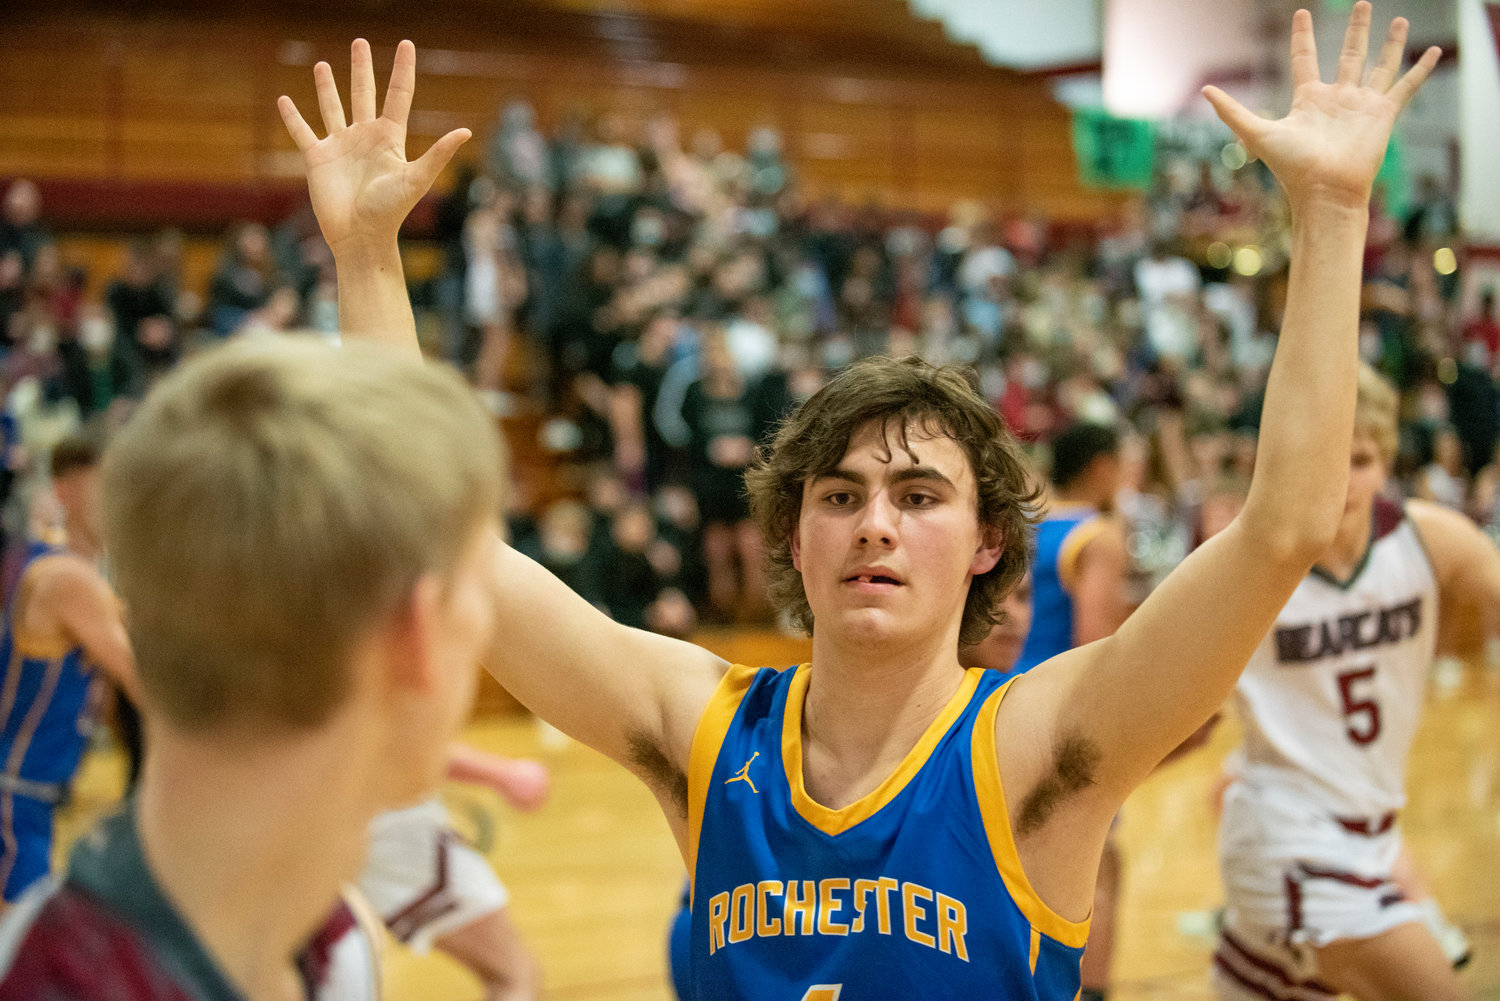 Rochester's Sawyer Robbins defense against a W.F. West inbounds pass on Feb. 4.